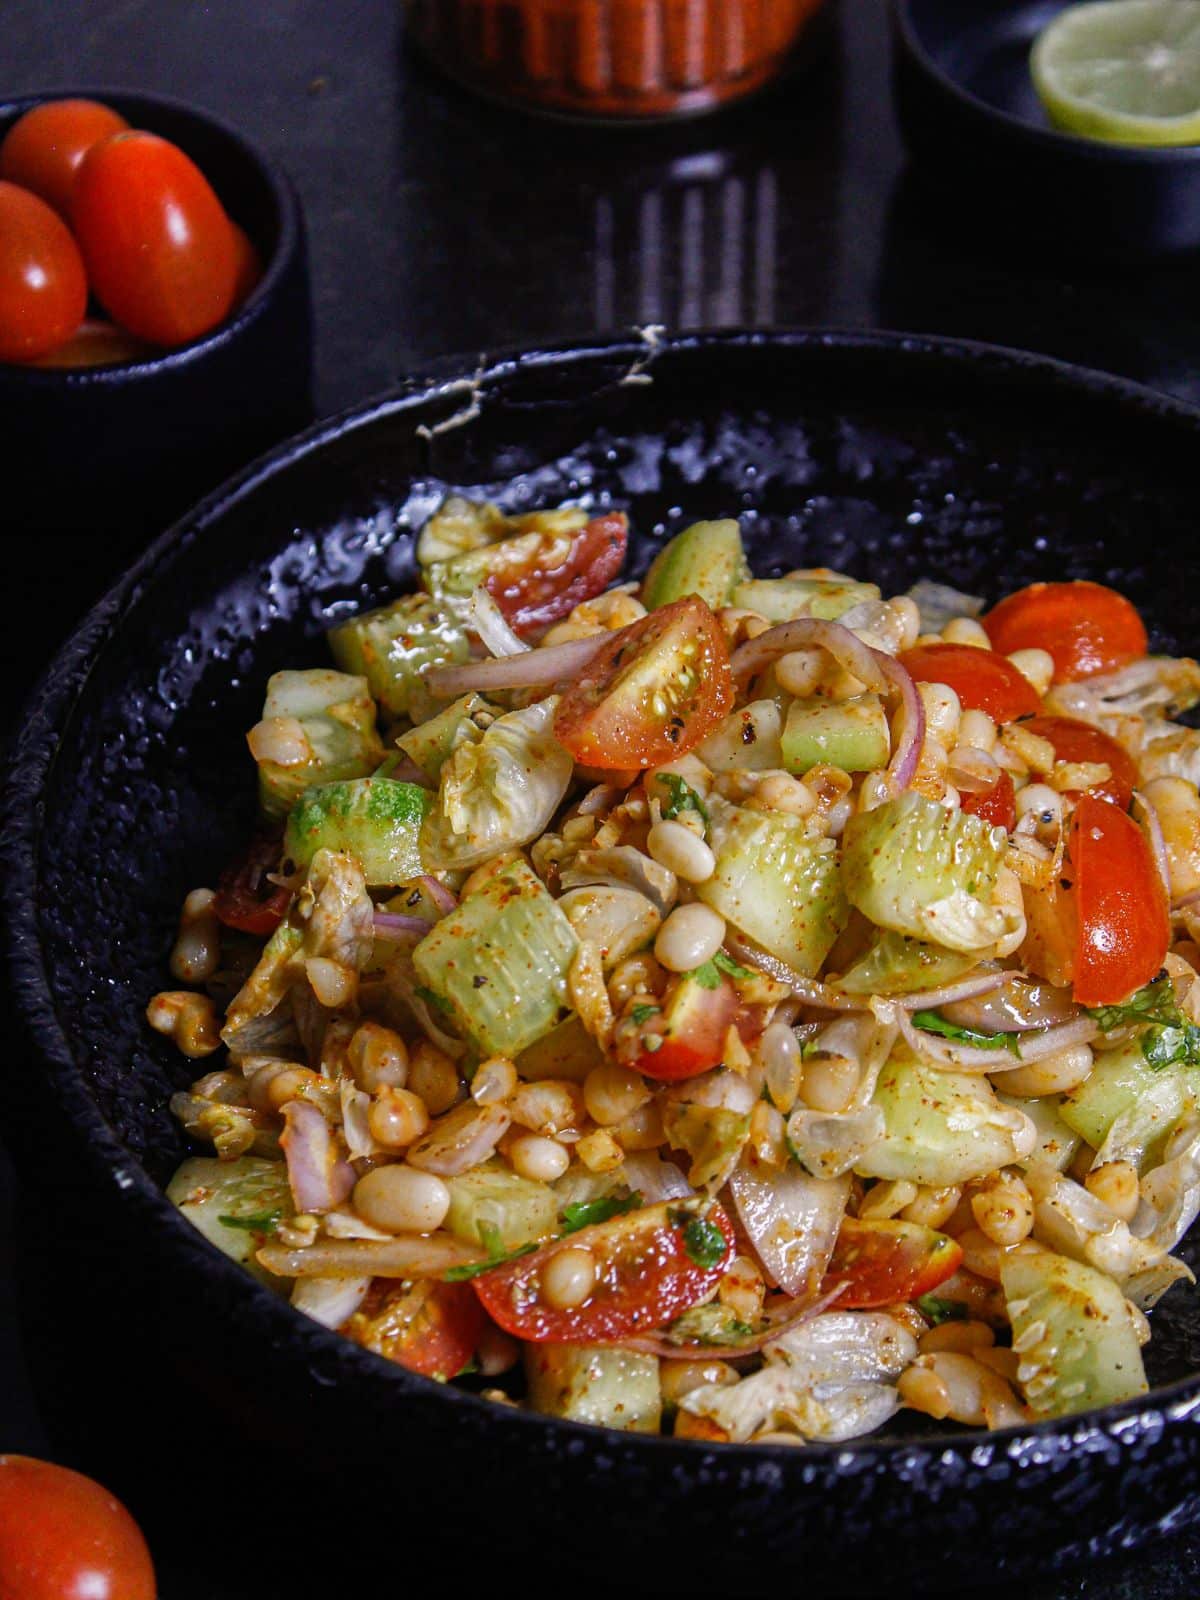 Delicious Boiled Soyabean Salad